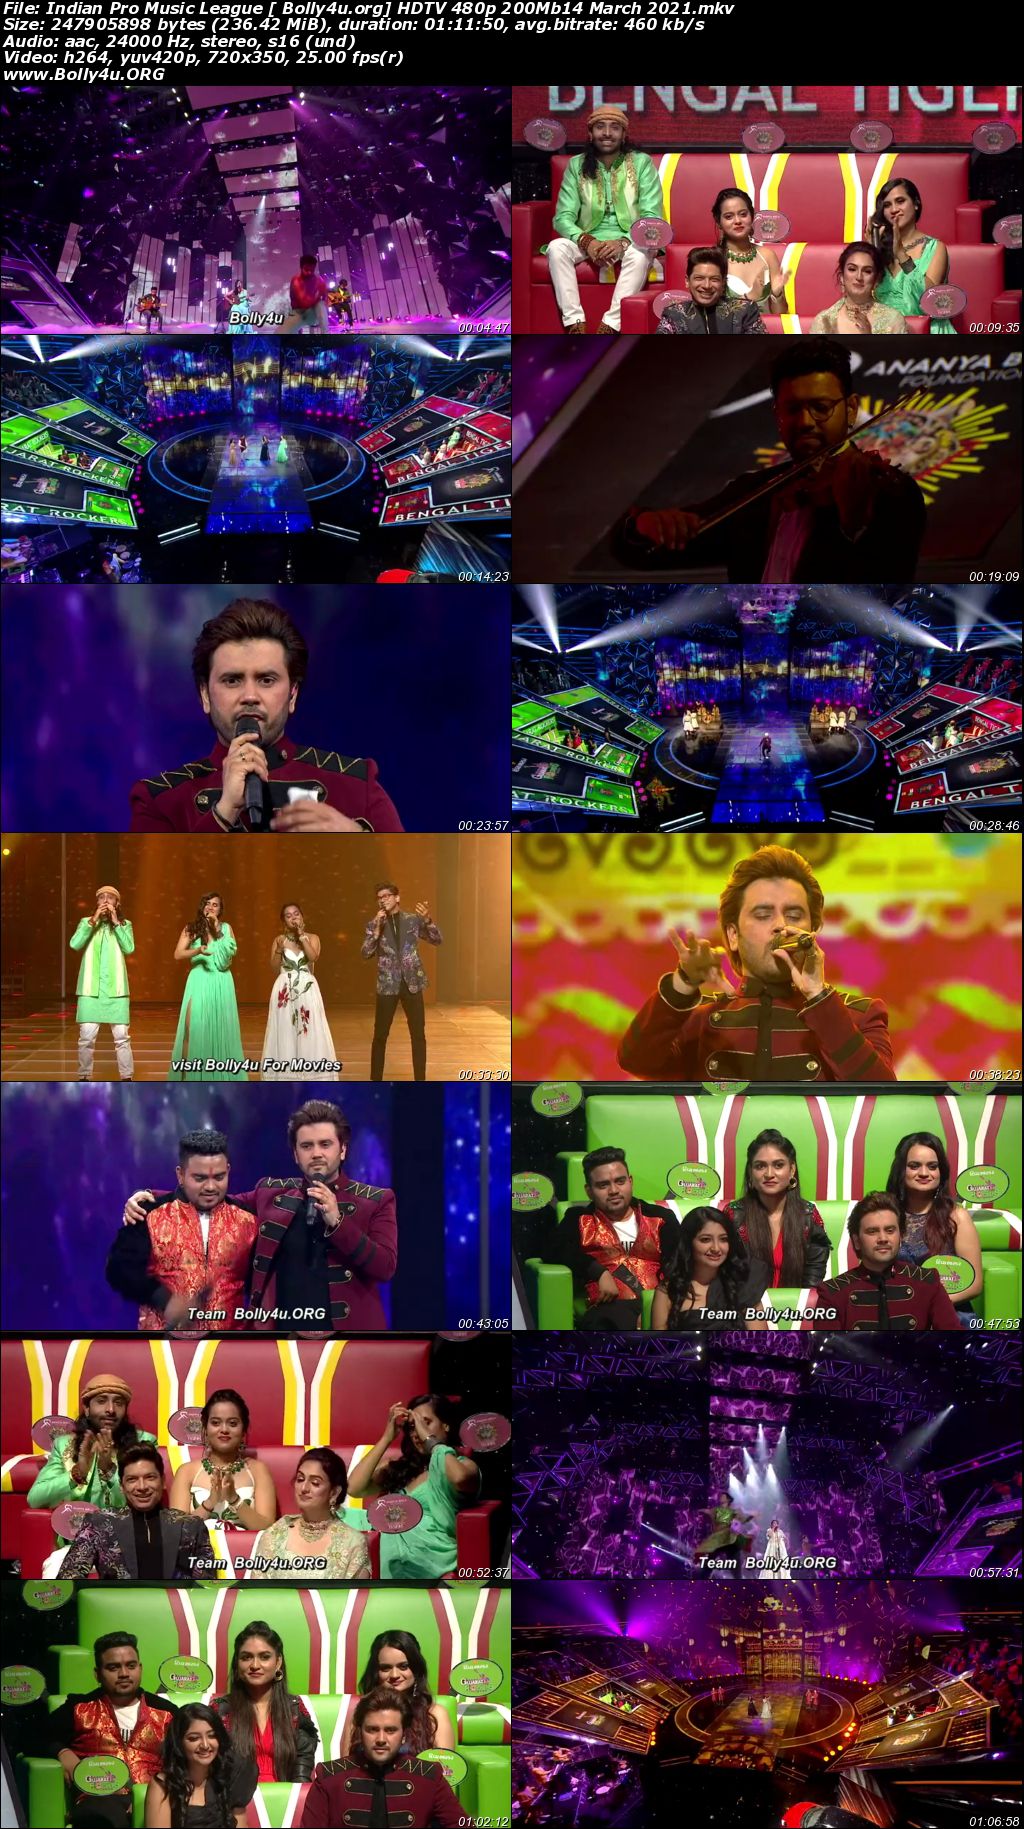 Indian Pro Music League HDTV 480p 200Mb 14 March 2021 Download